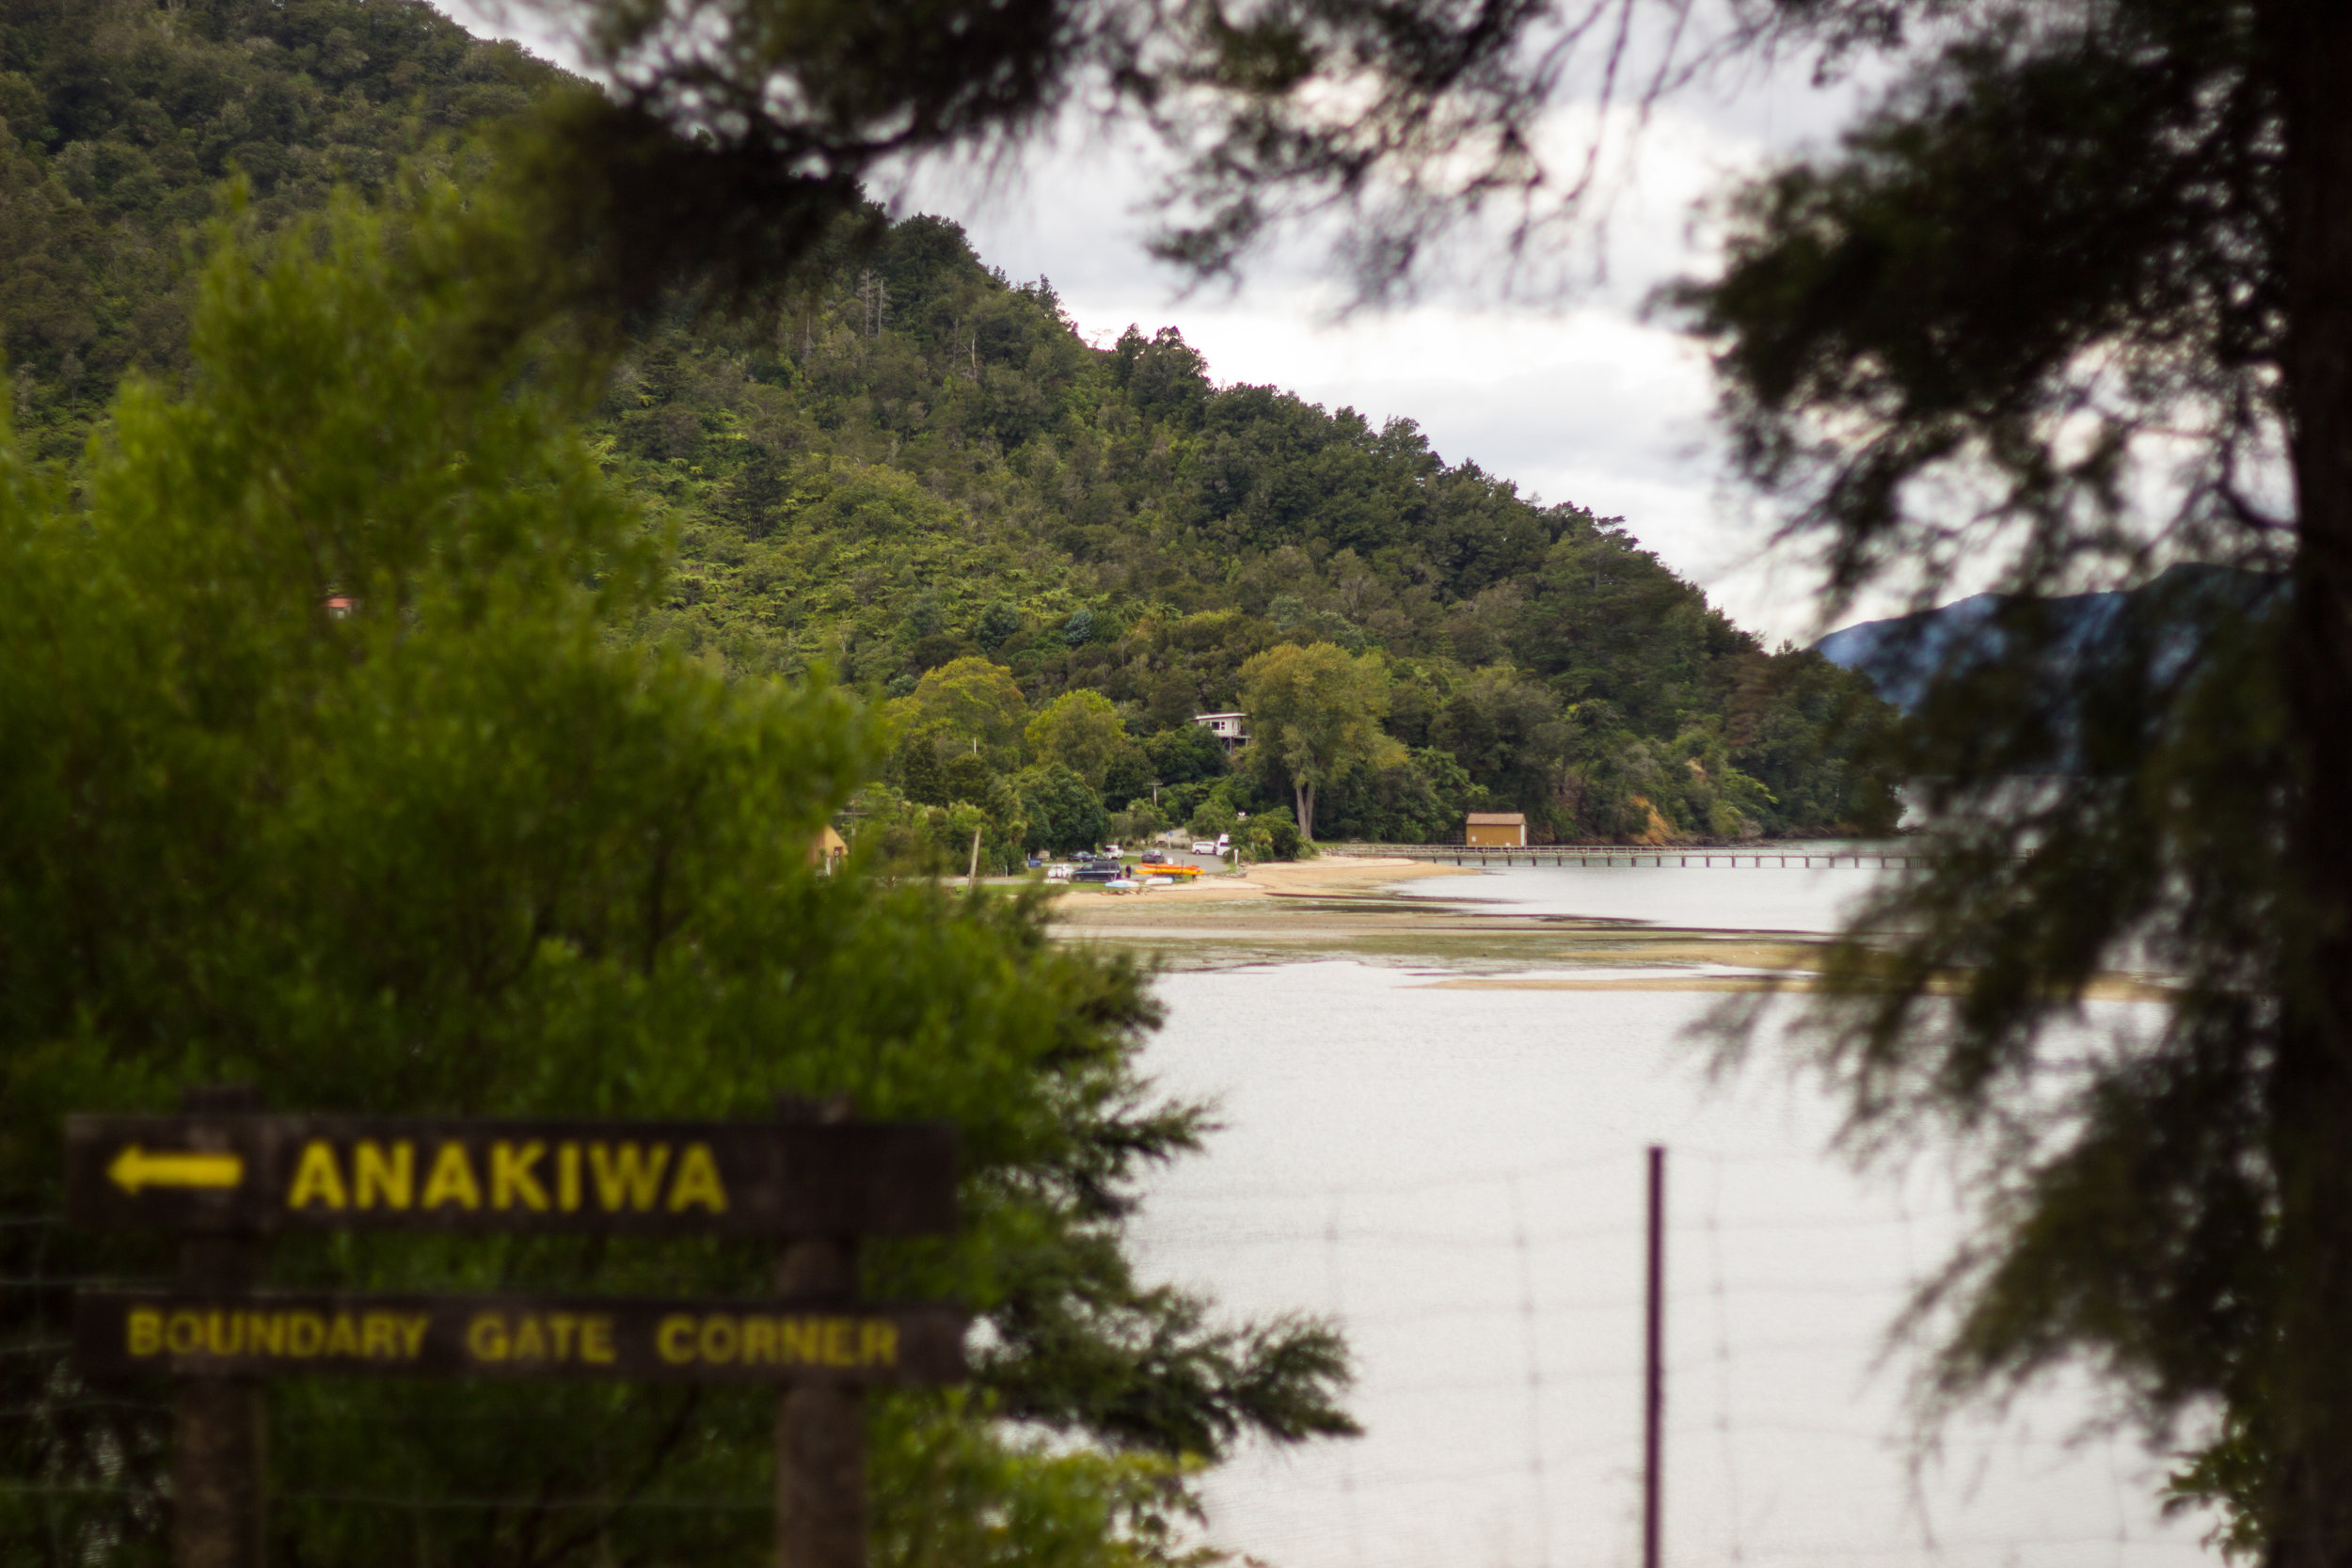 The Queen Charlotte track terminates and we ride The Link Track to Havelock